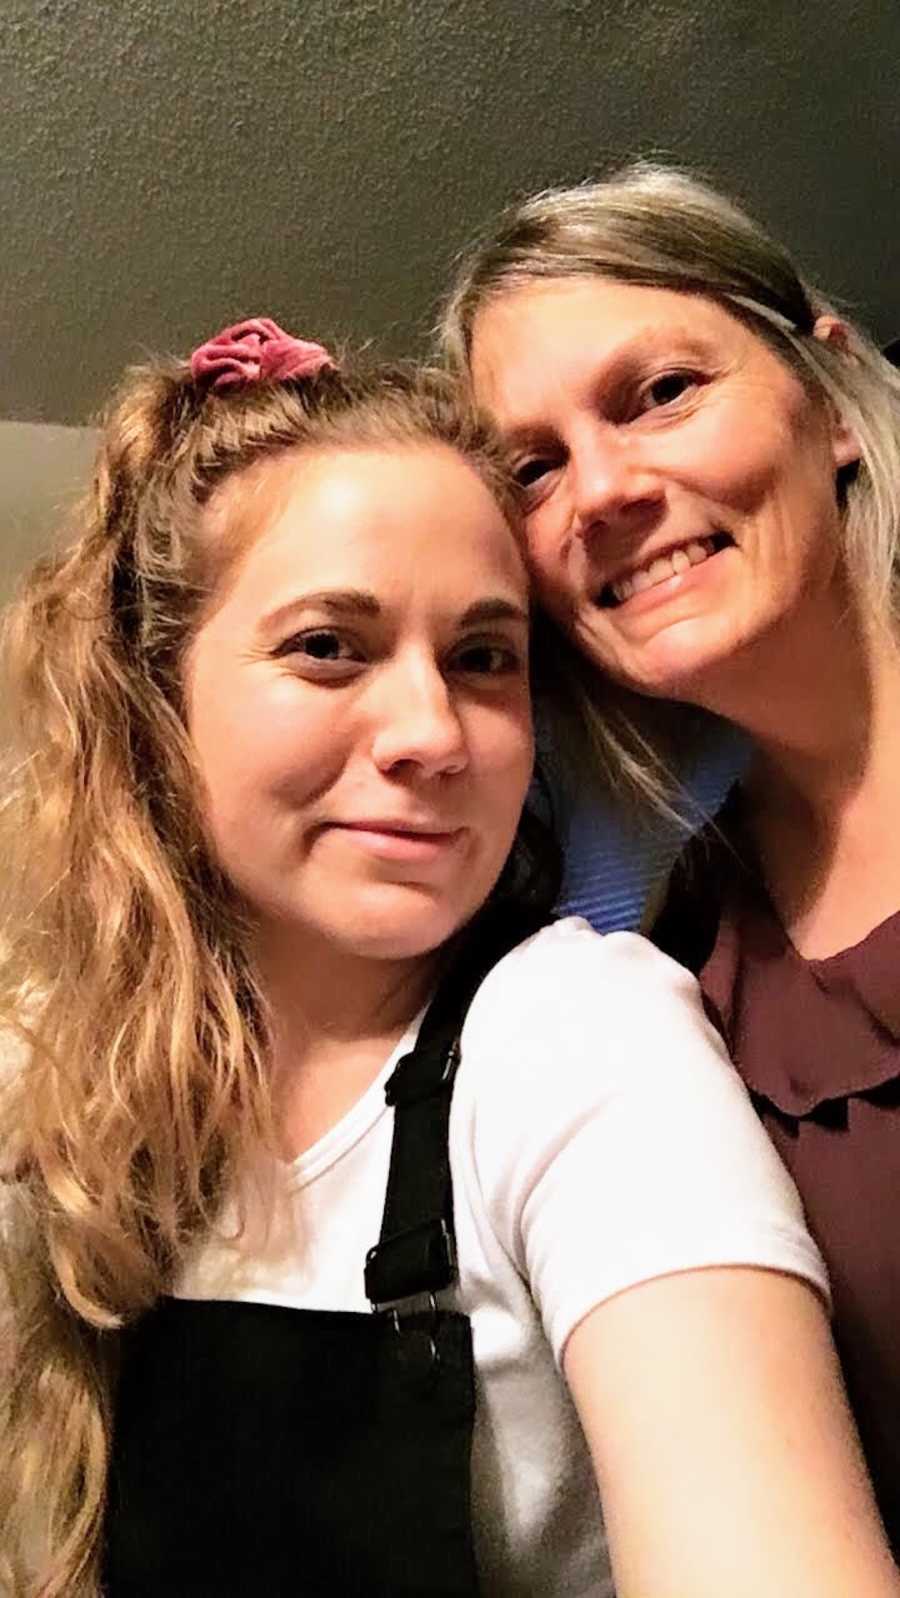 Mother and daughter taking smiling selfie